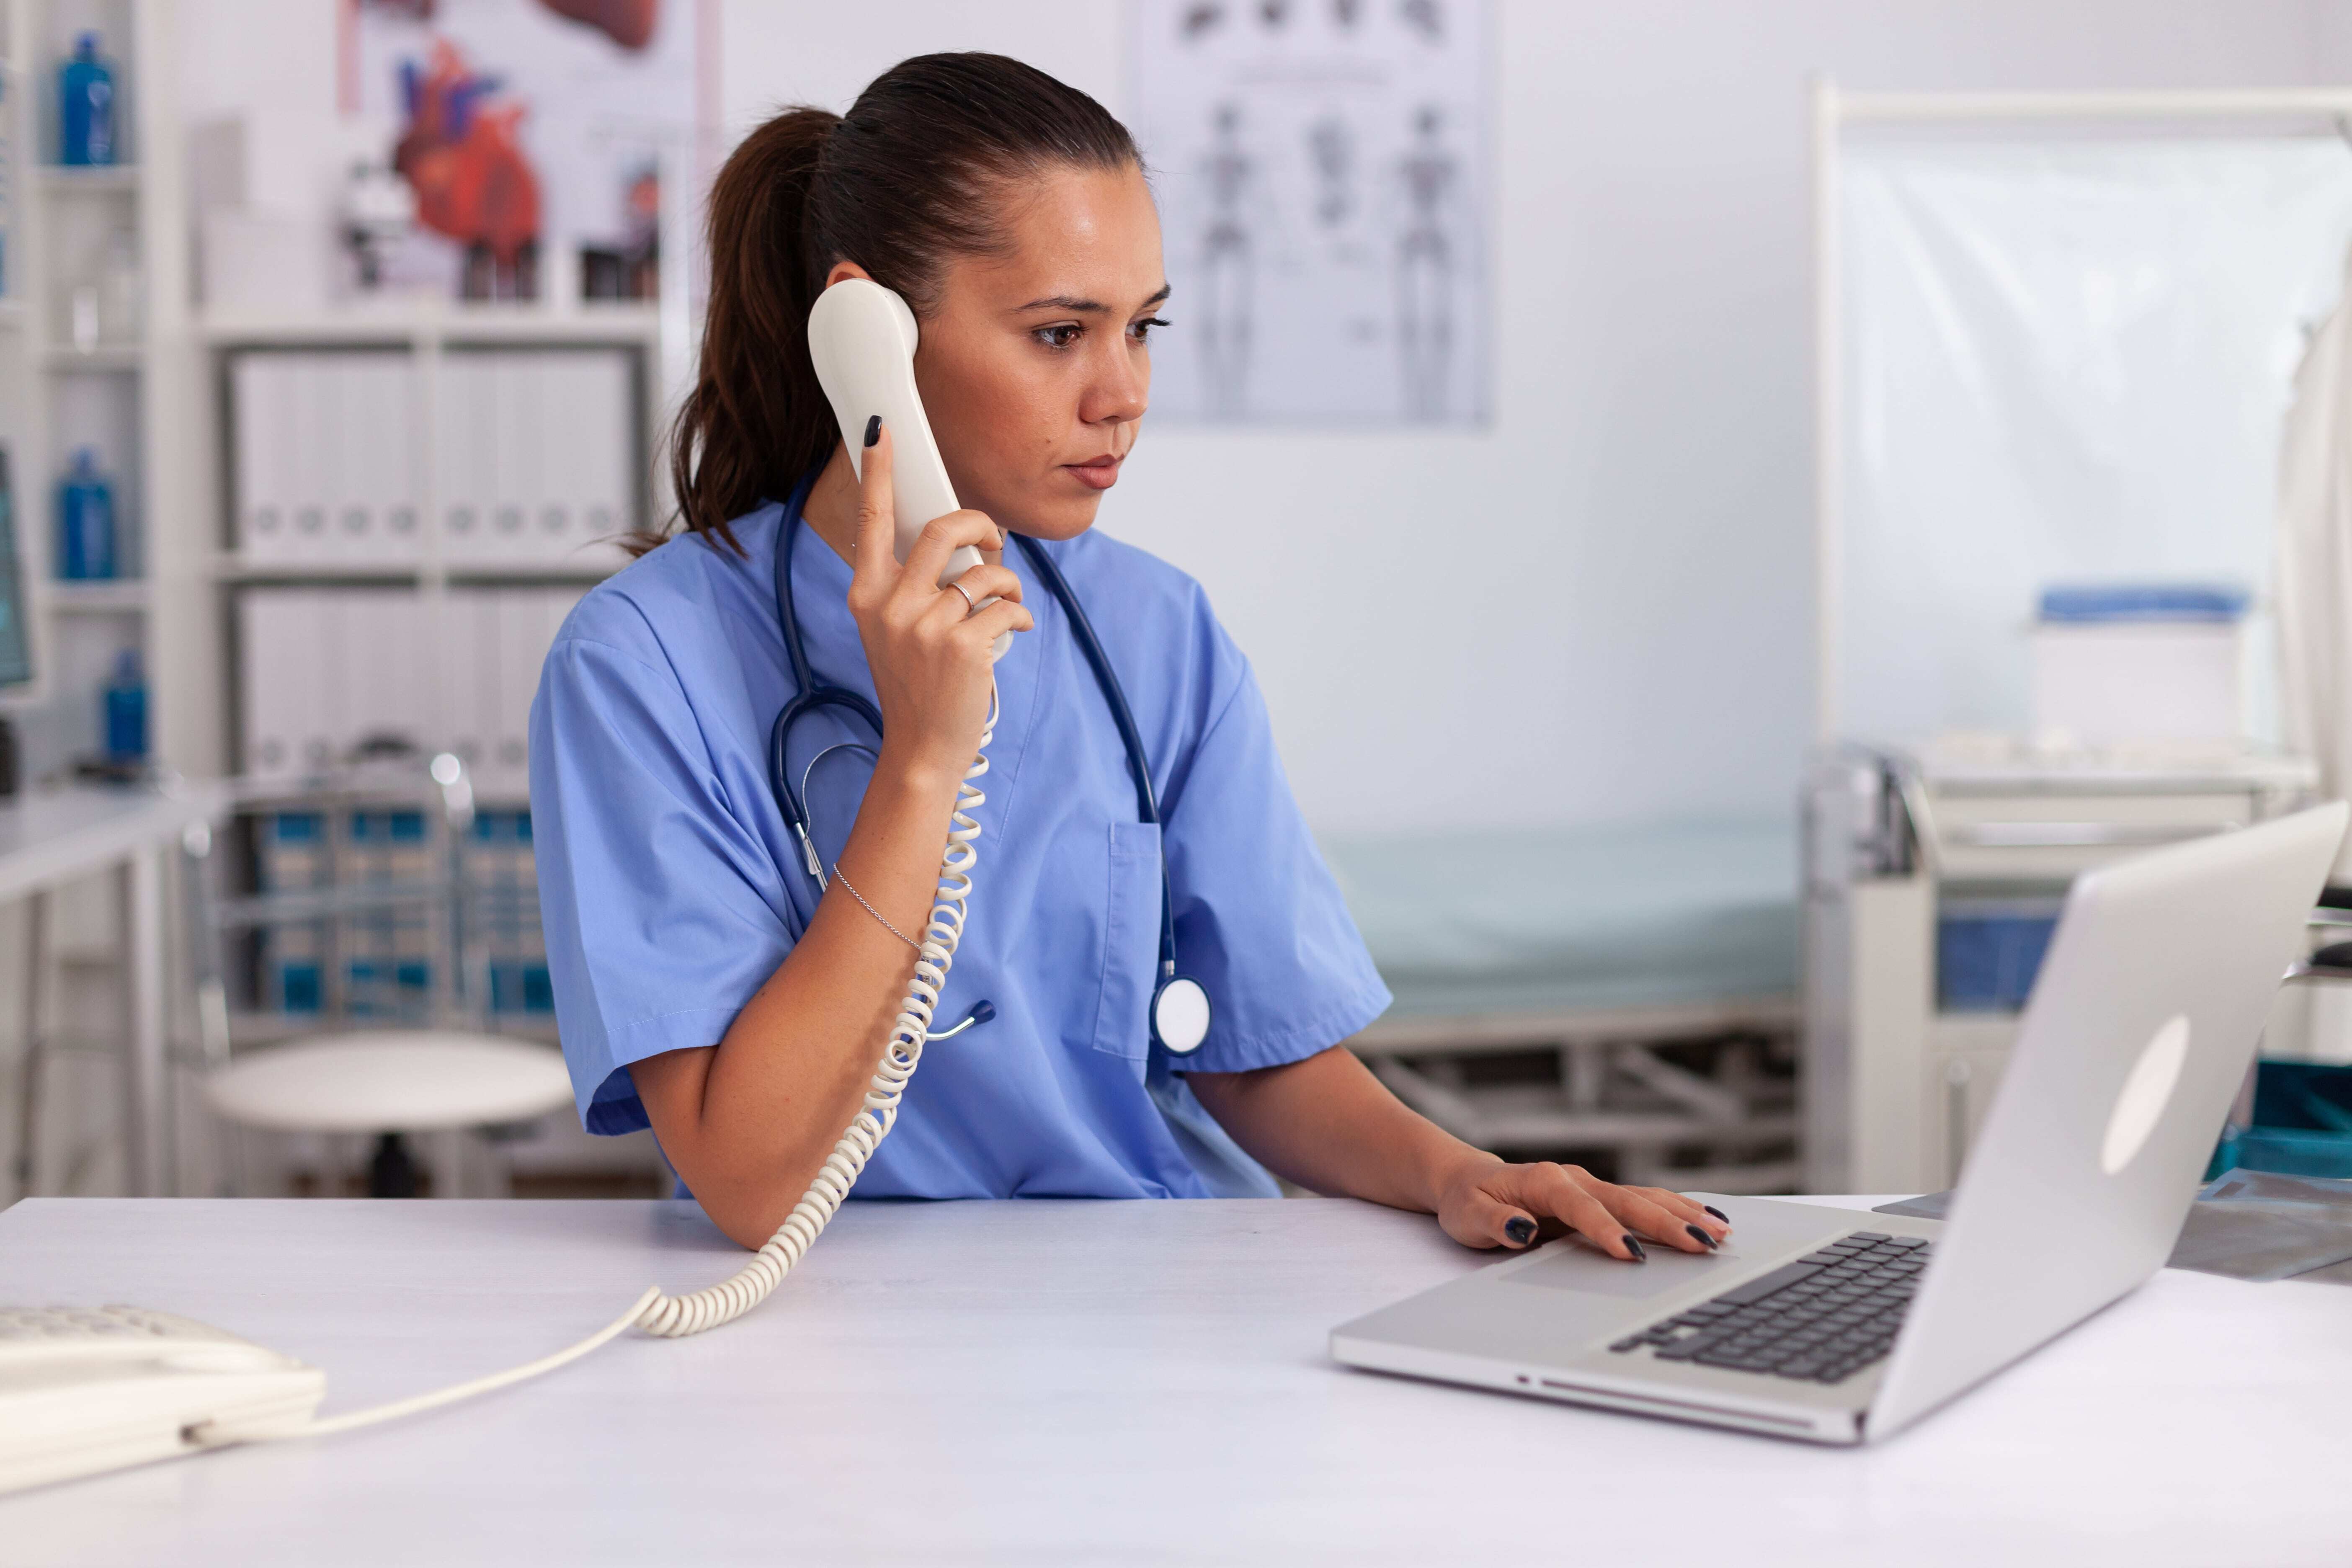 medical-practitioner-answering-phone-calls-min